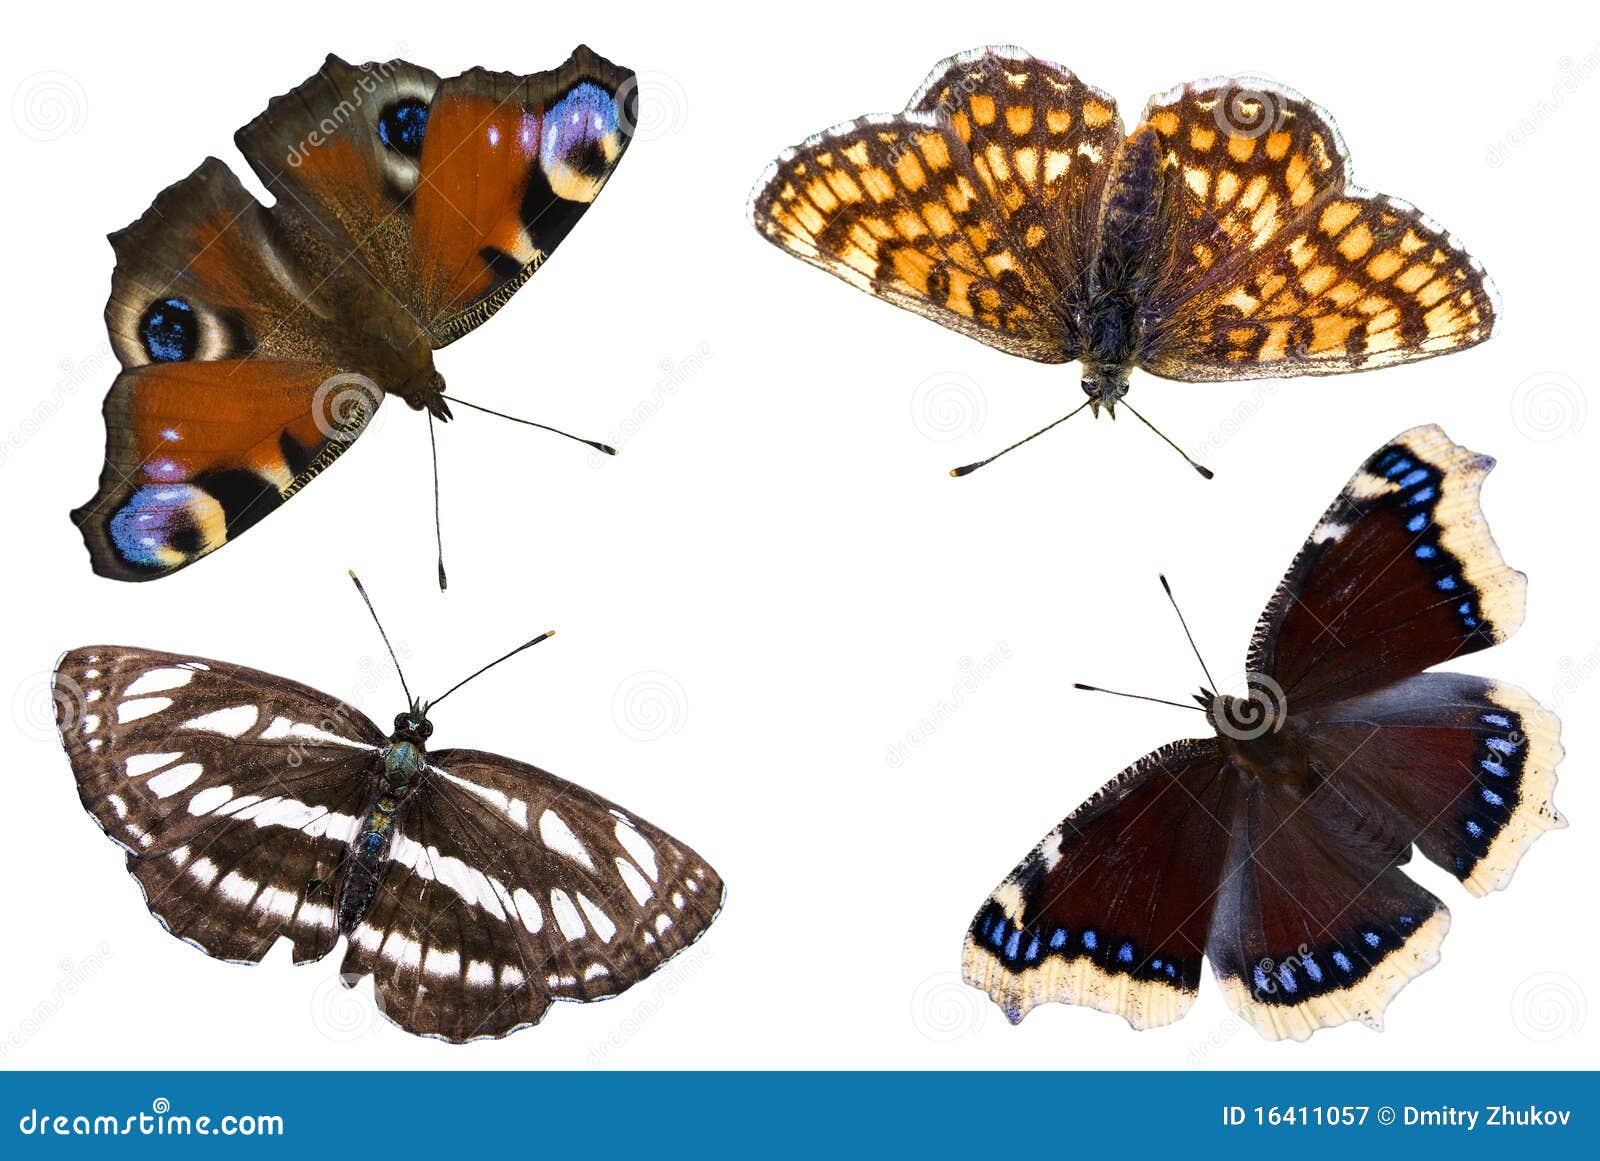 The four butterflies stock image. Image of animal, isolated - 16411057